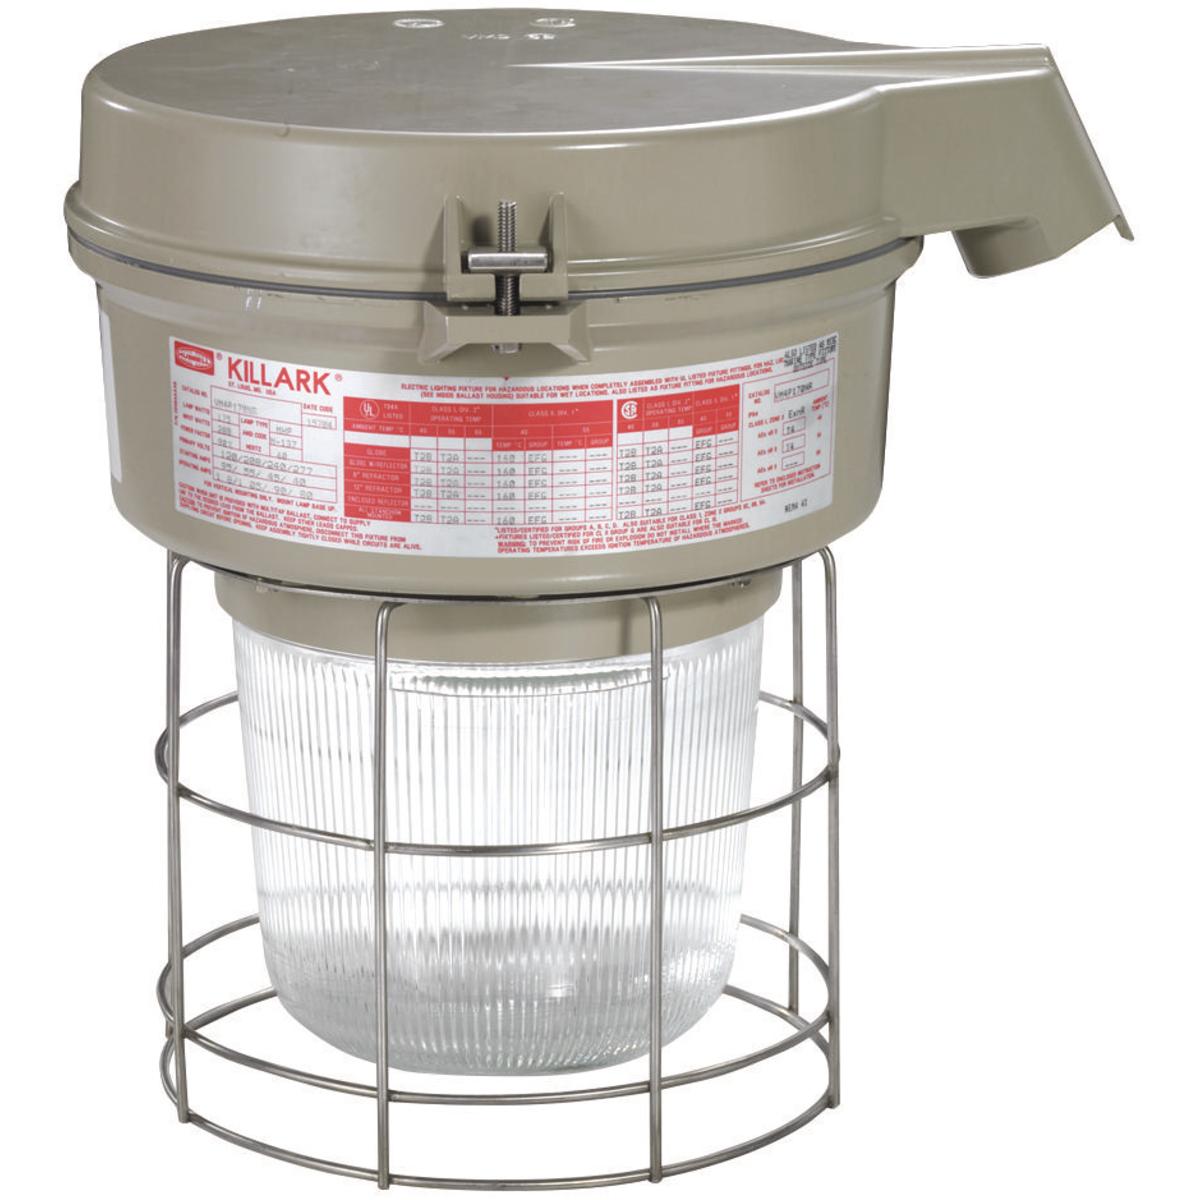 Hubbell VM4P170D5GLG VM4 Series - 175W Metal Halide Quadri-Volt - 1-1/2" Stanchion 25° - Globe and Guard  ; Ballast tank and splice box – corrosion resistant copper-free aluminum alloy with baked powder epoxy/polyester finish, electrostatically applied for complete, uniform c